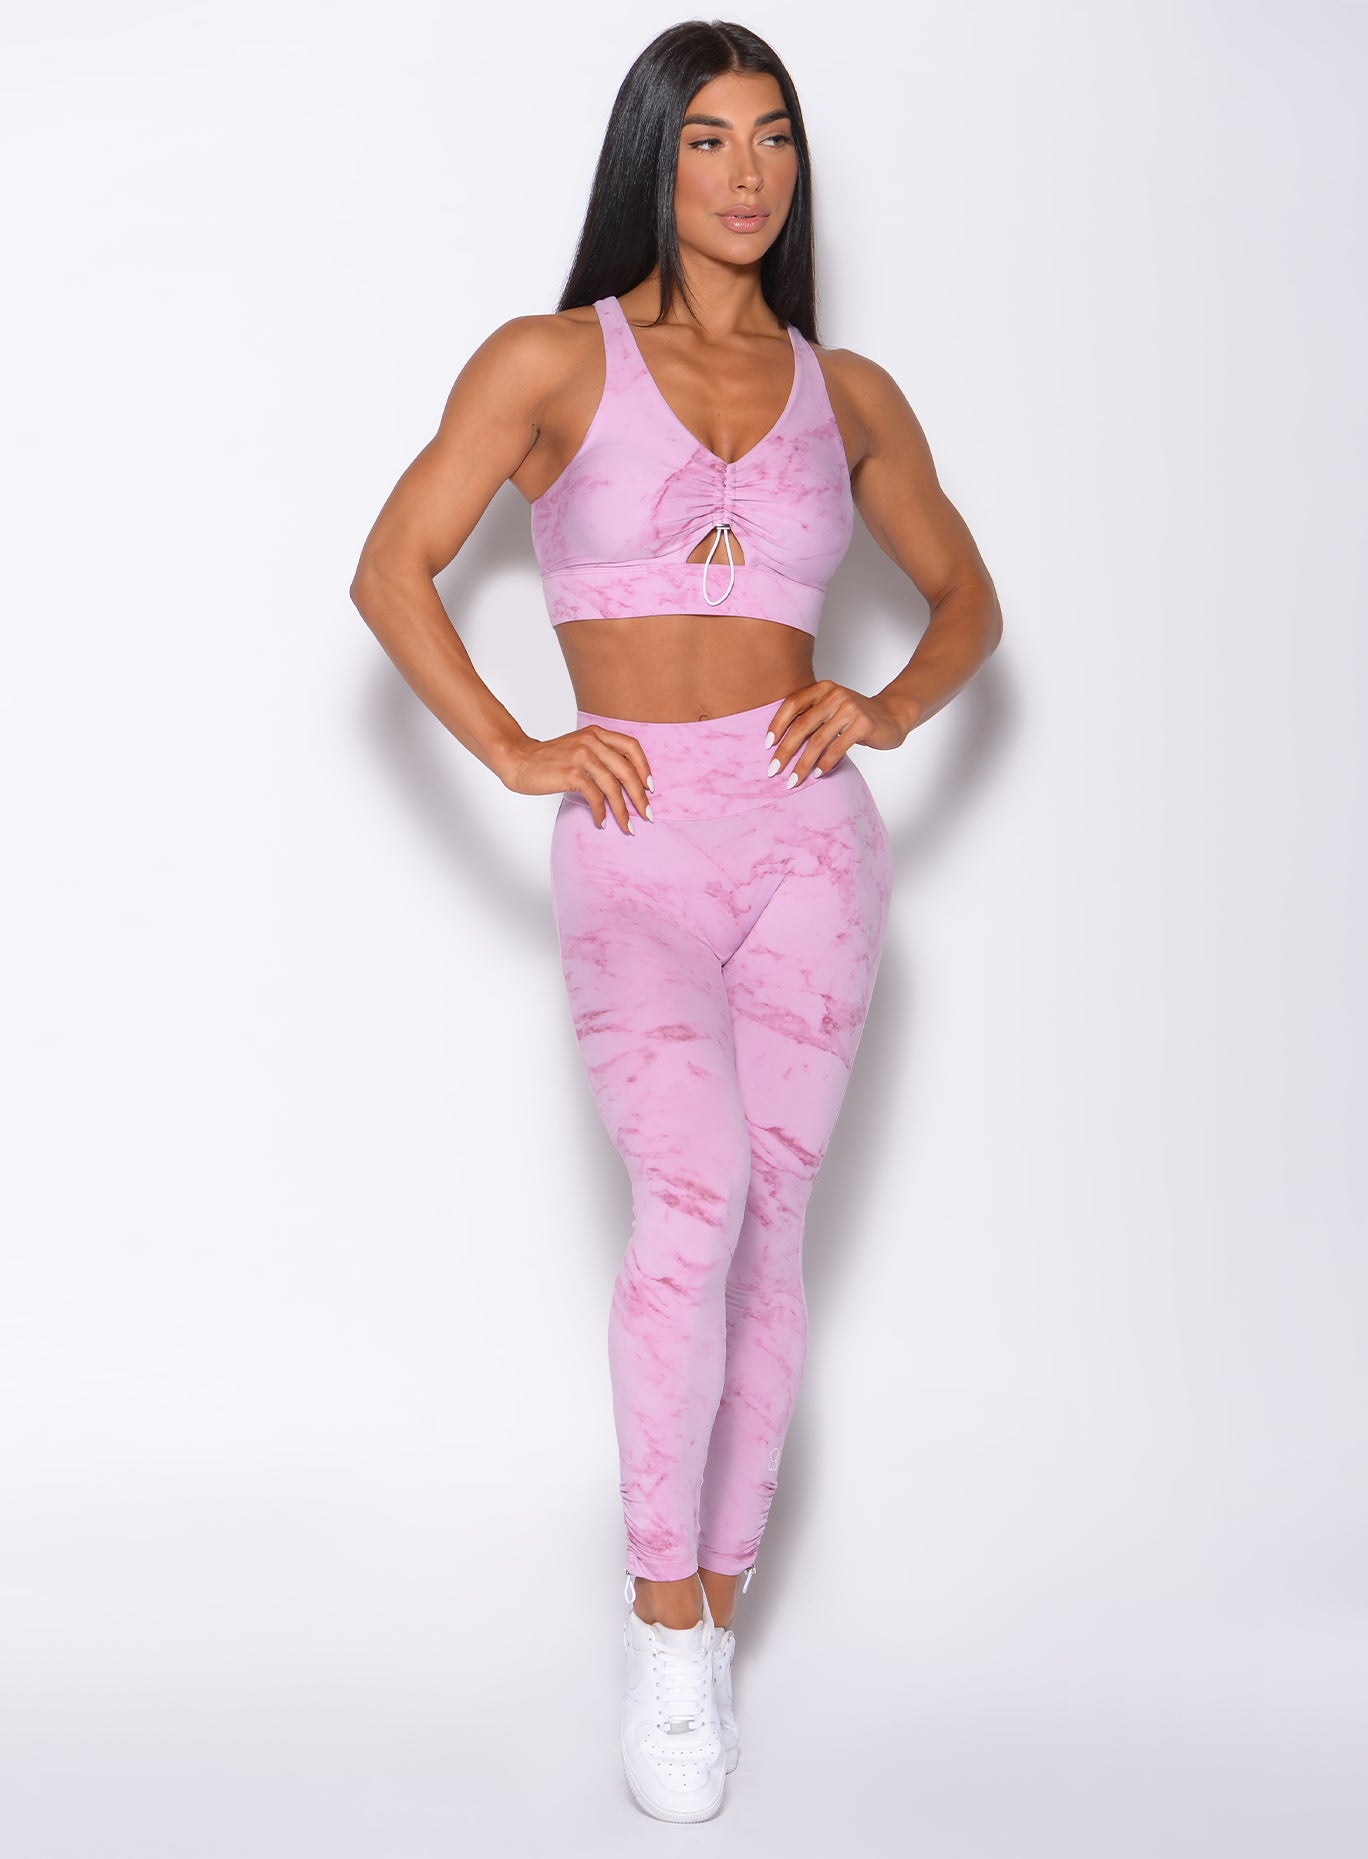 Front profile view of a model wearing our adjustable leggings in marble pink color and a matching sports bra